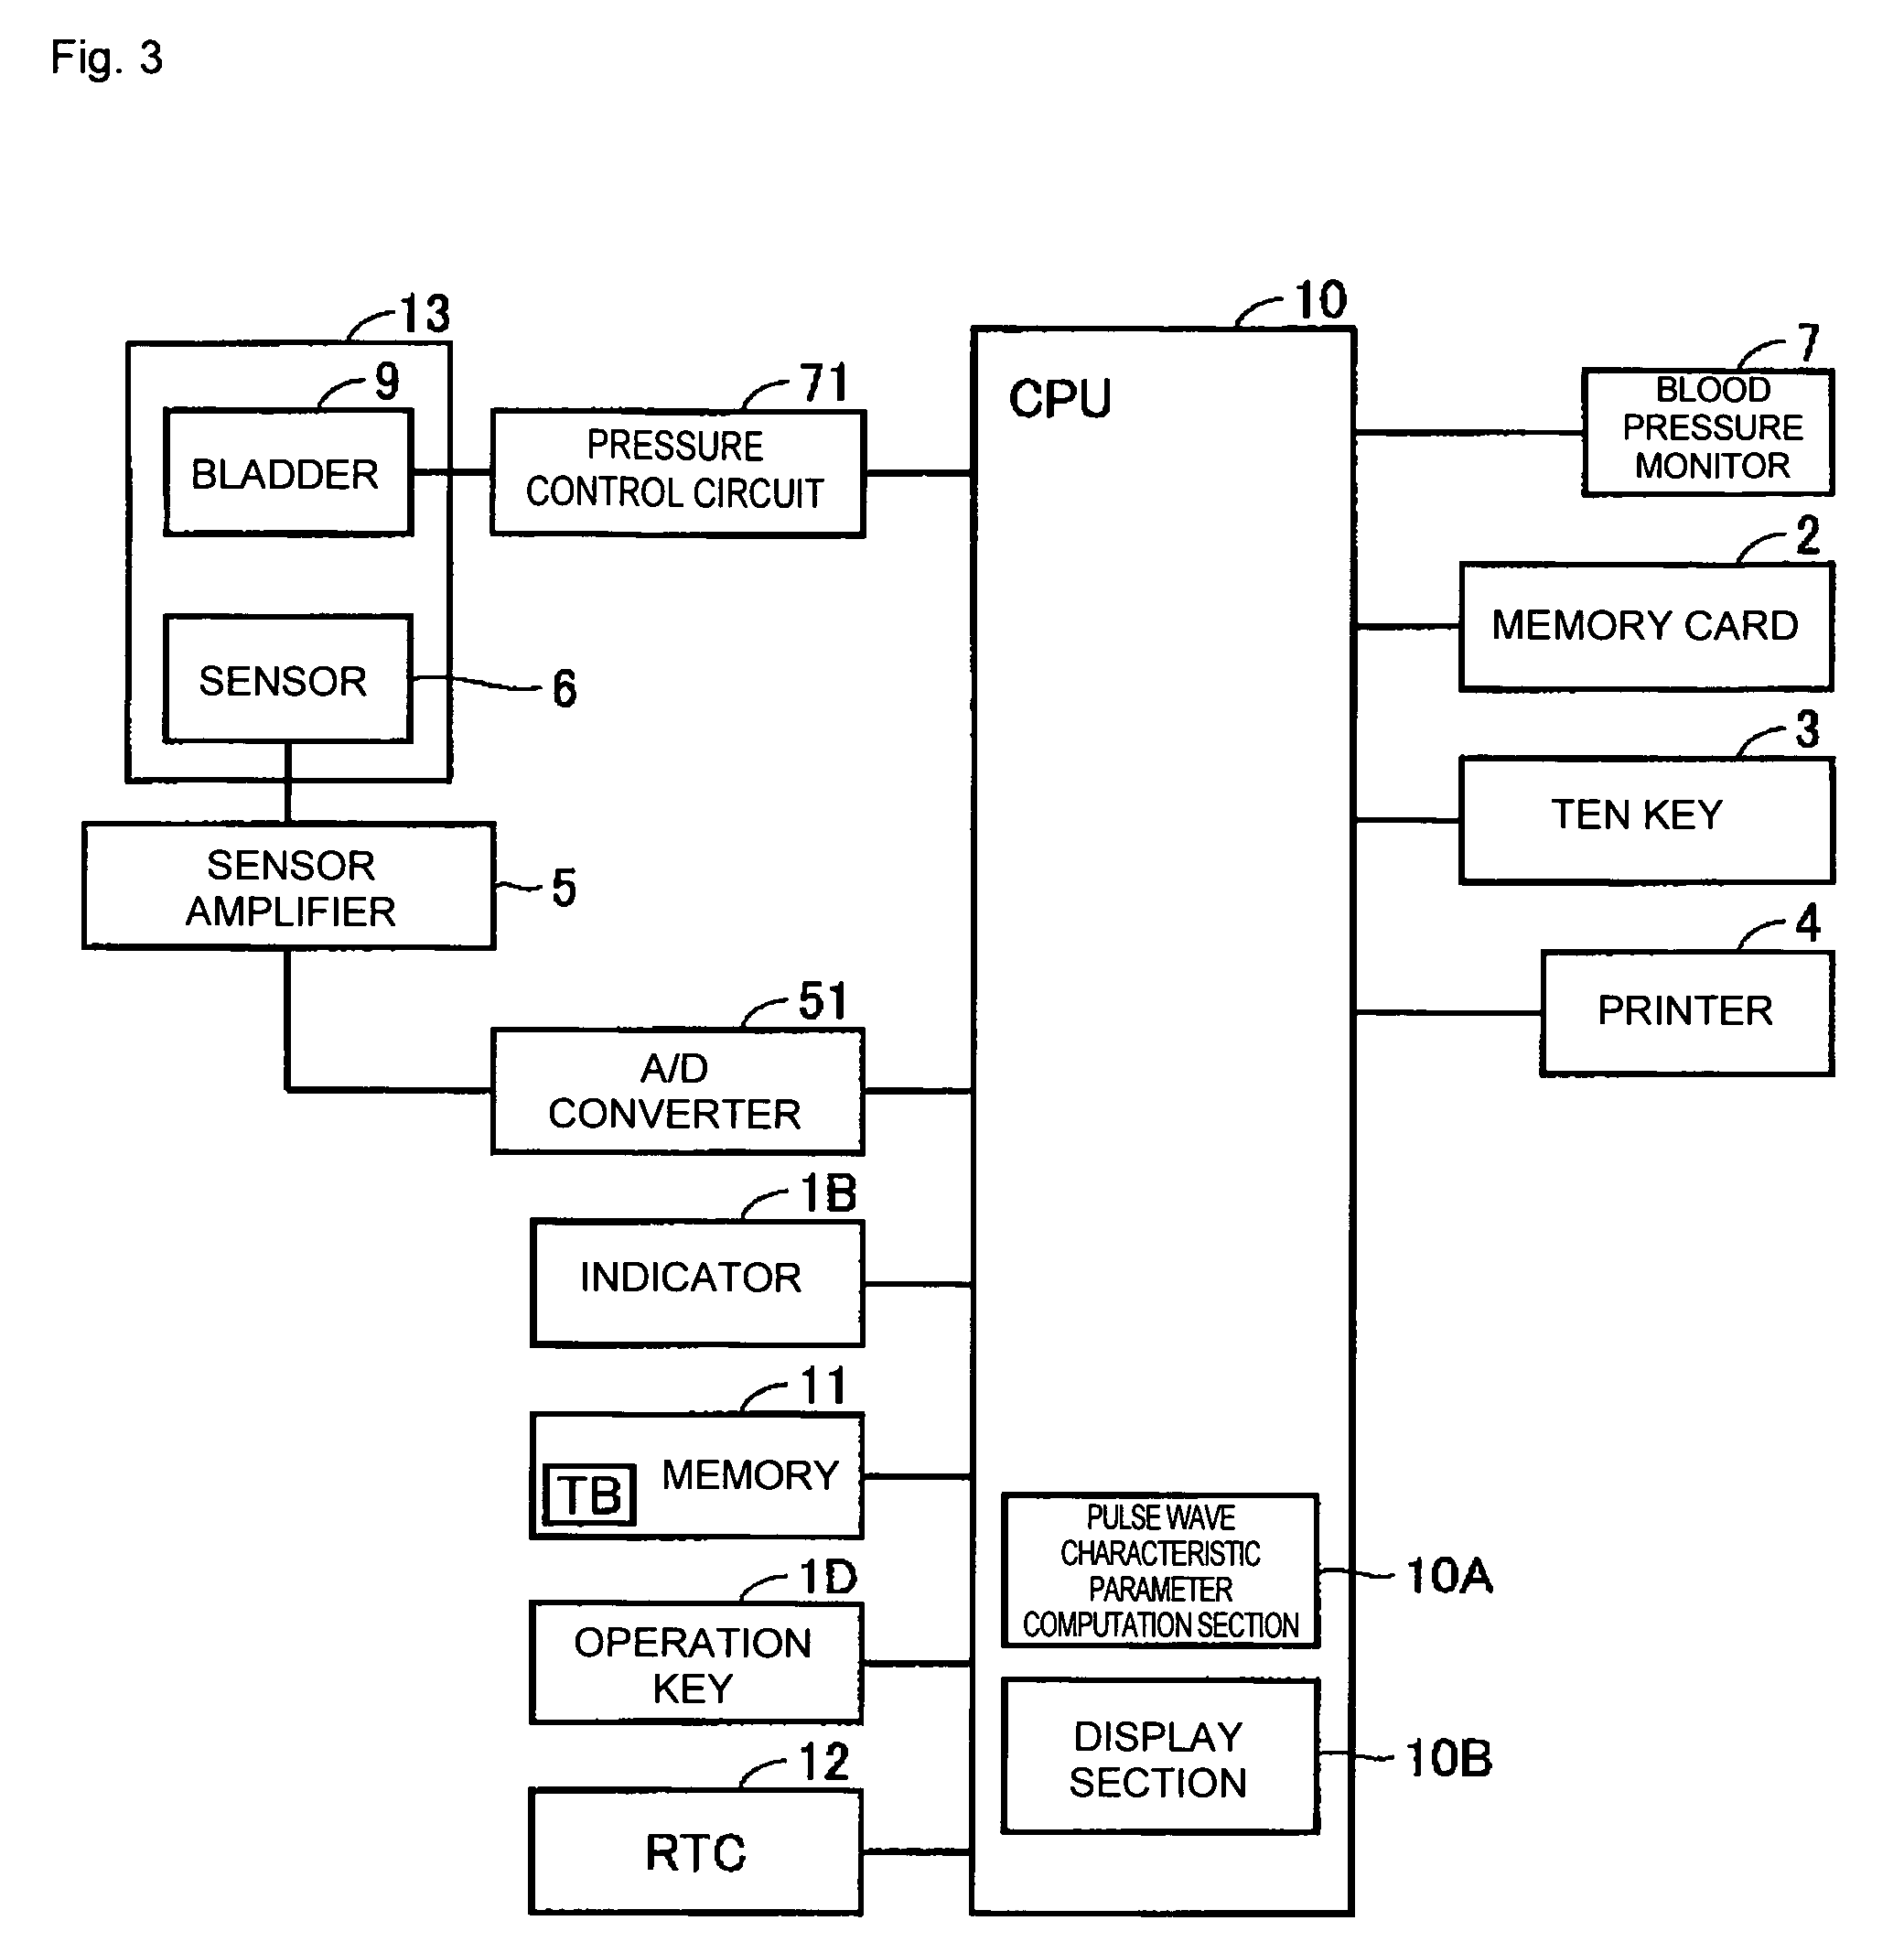 Pulse wave monitoring device